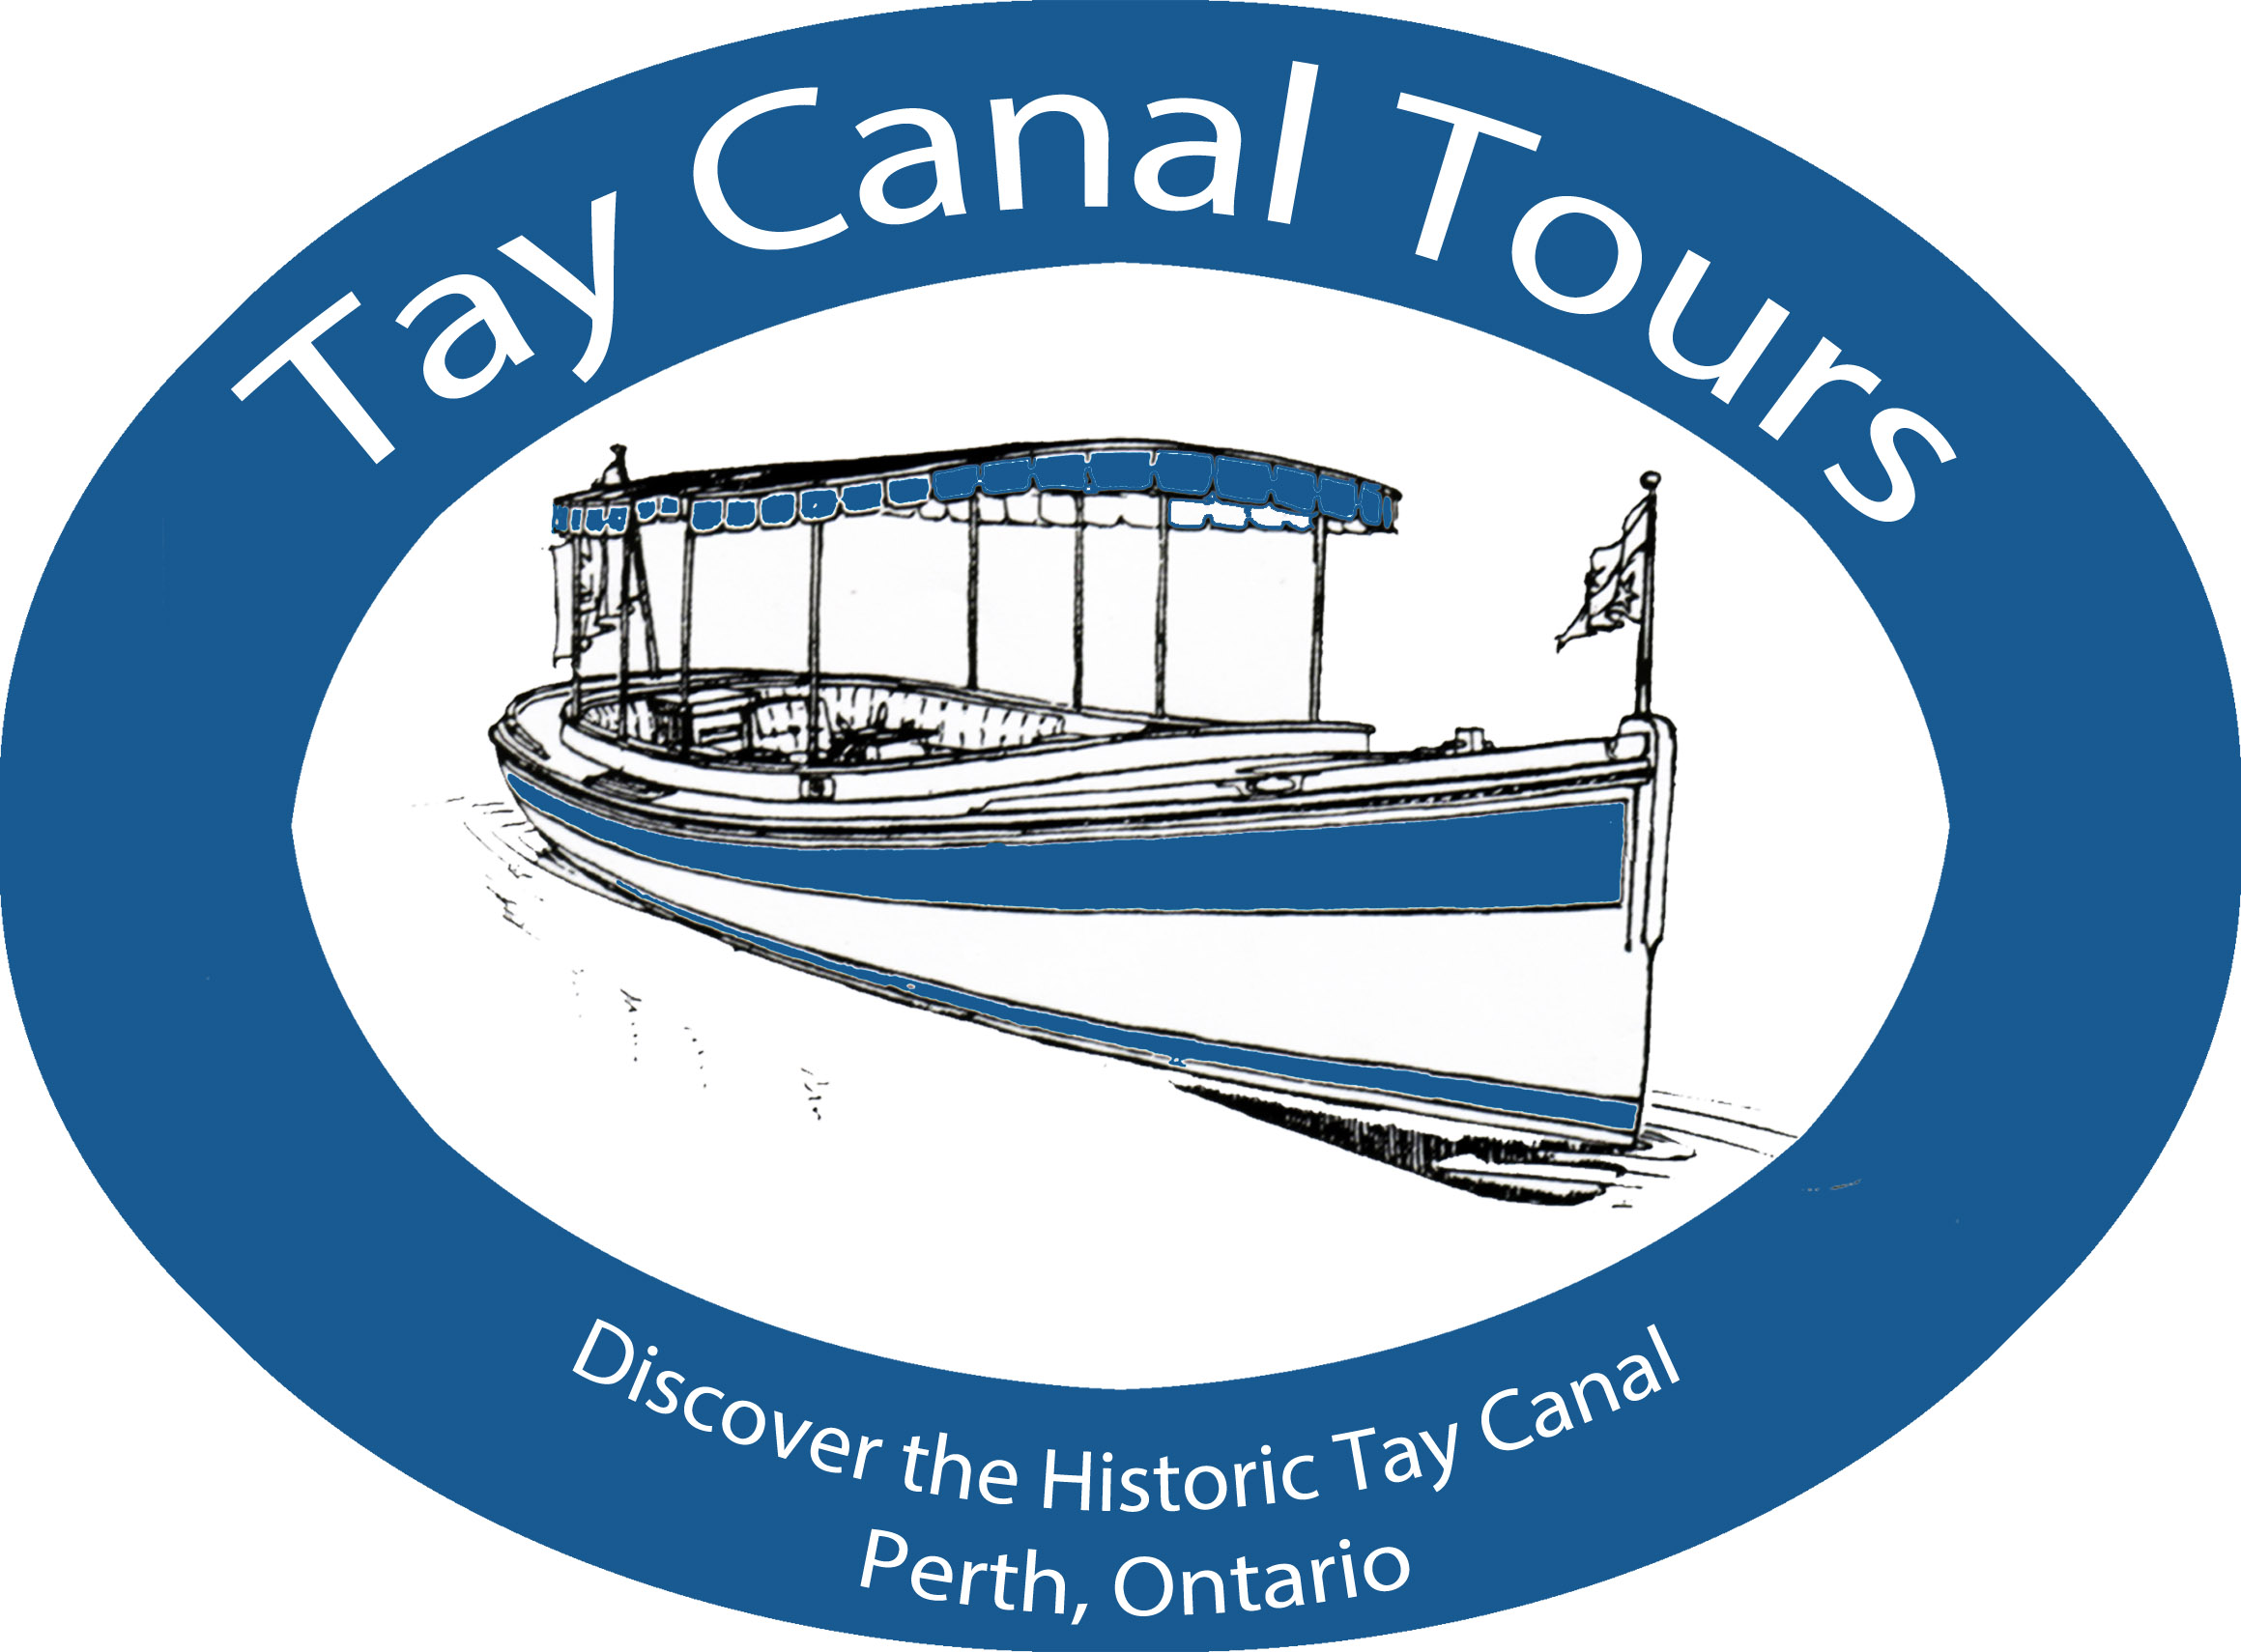 Tay Canal Tours